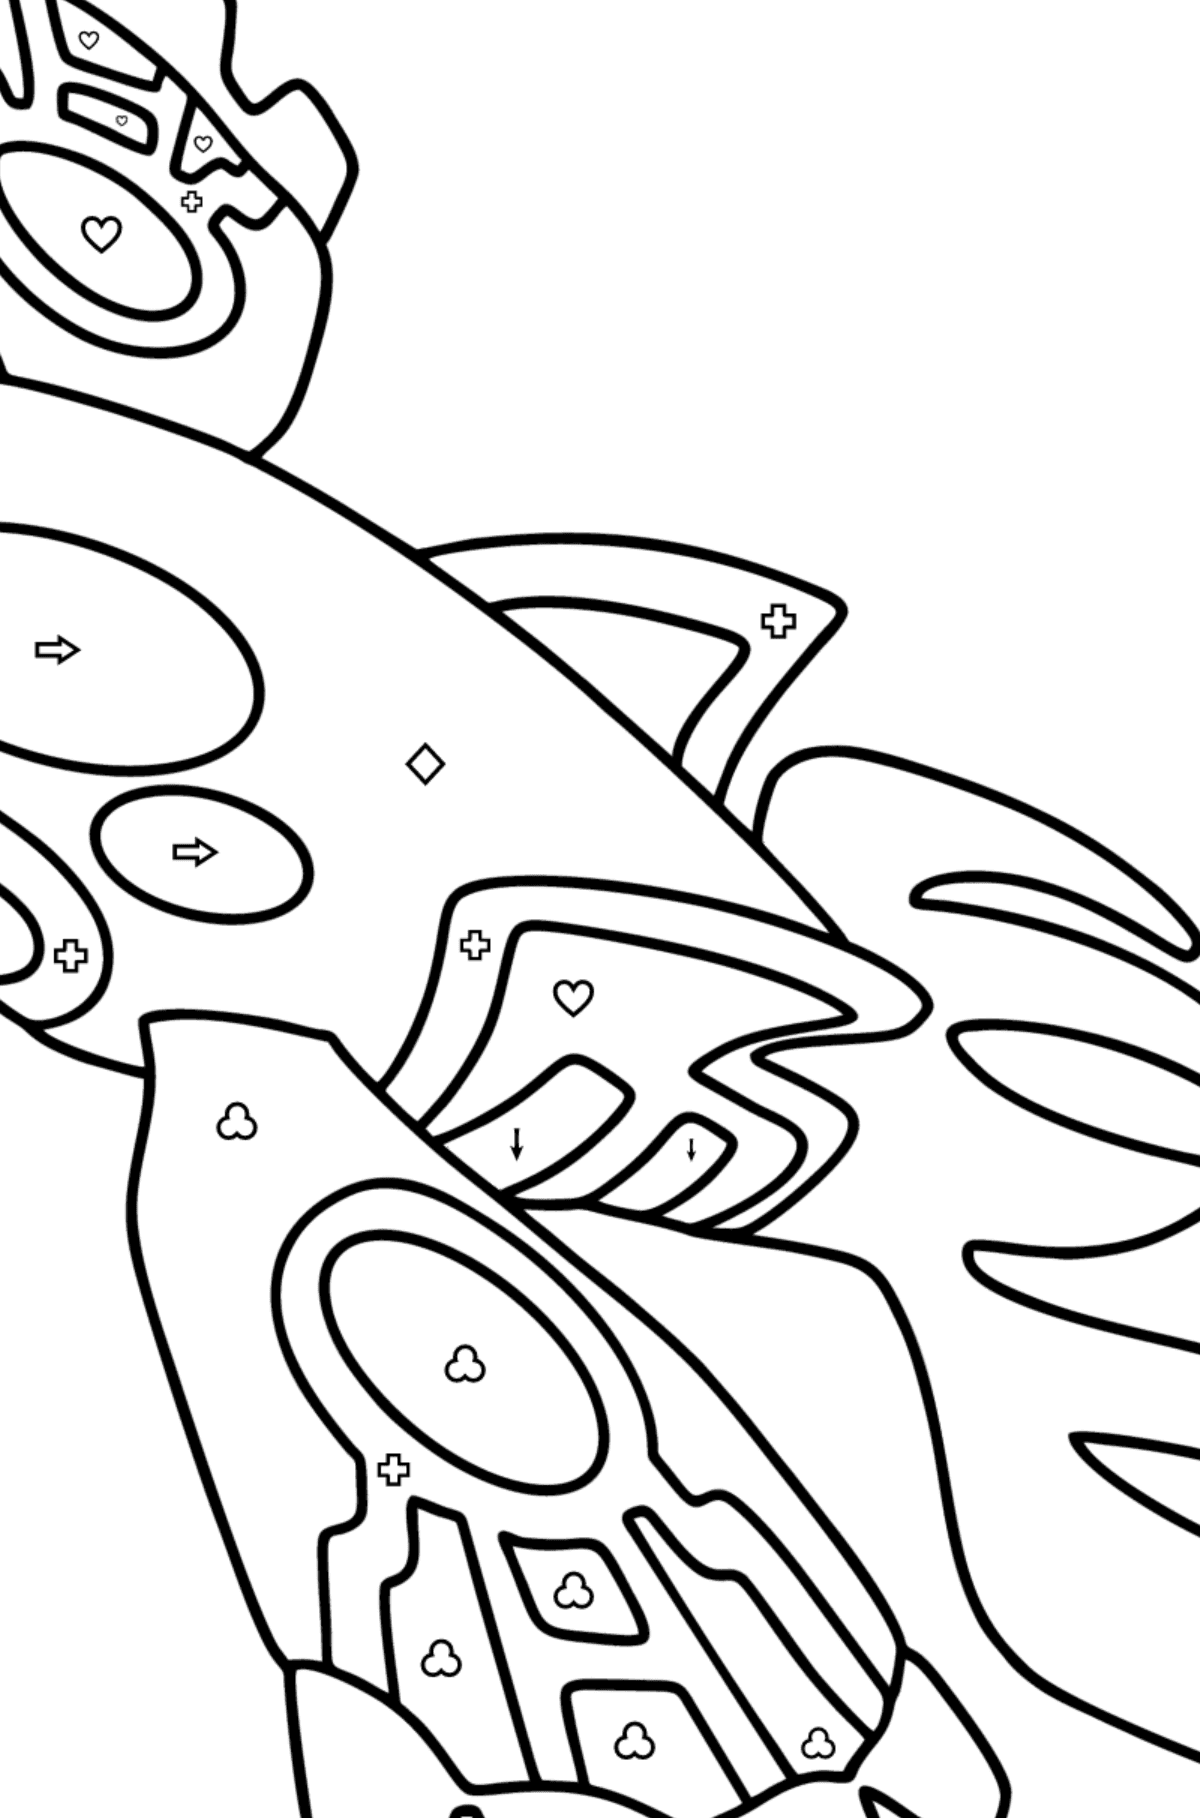 Coloring page Pokemon Go Kyogre - Coloring by Symbols and Geometric Shapes for Kids